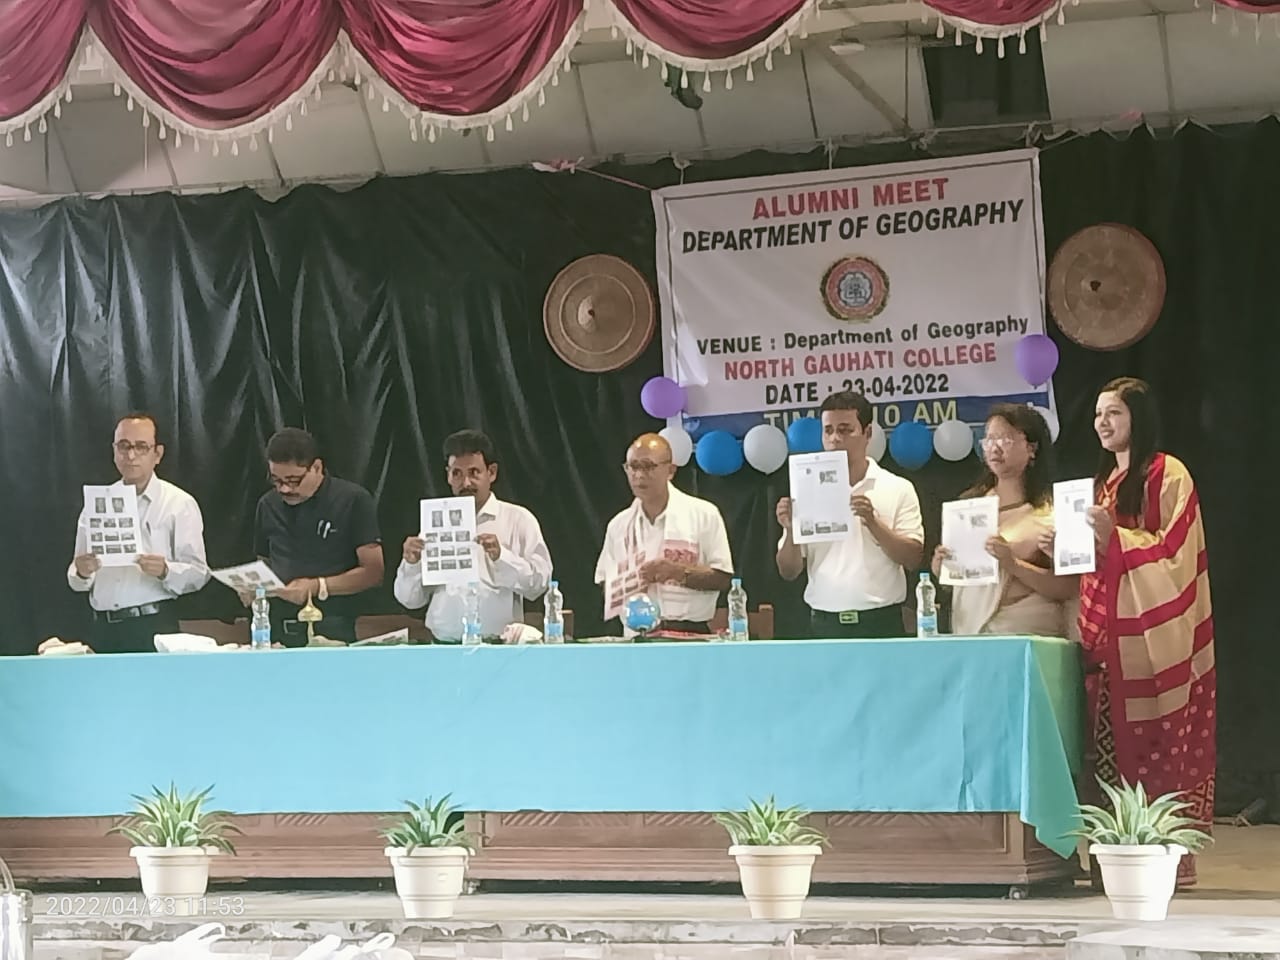 "Alumni Meet" organised by the Department of Geography, North Gauhati College on 23rd April, 2022